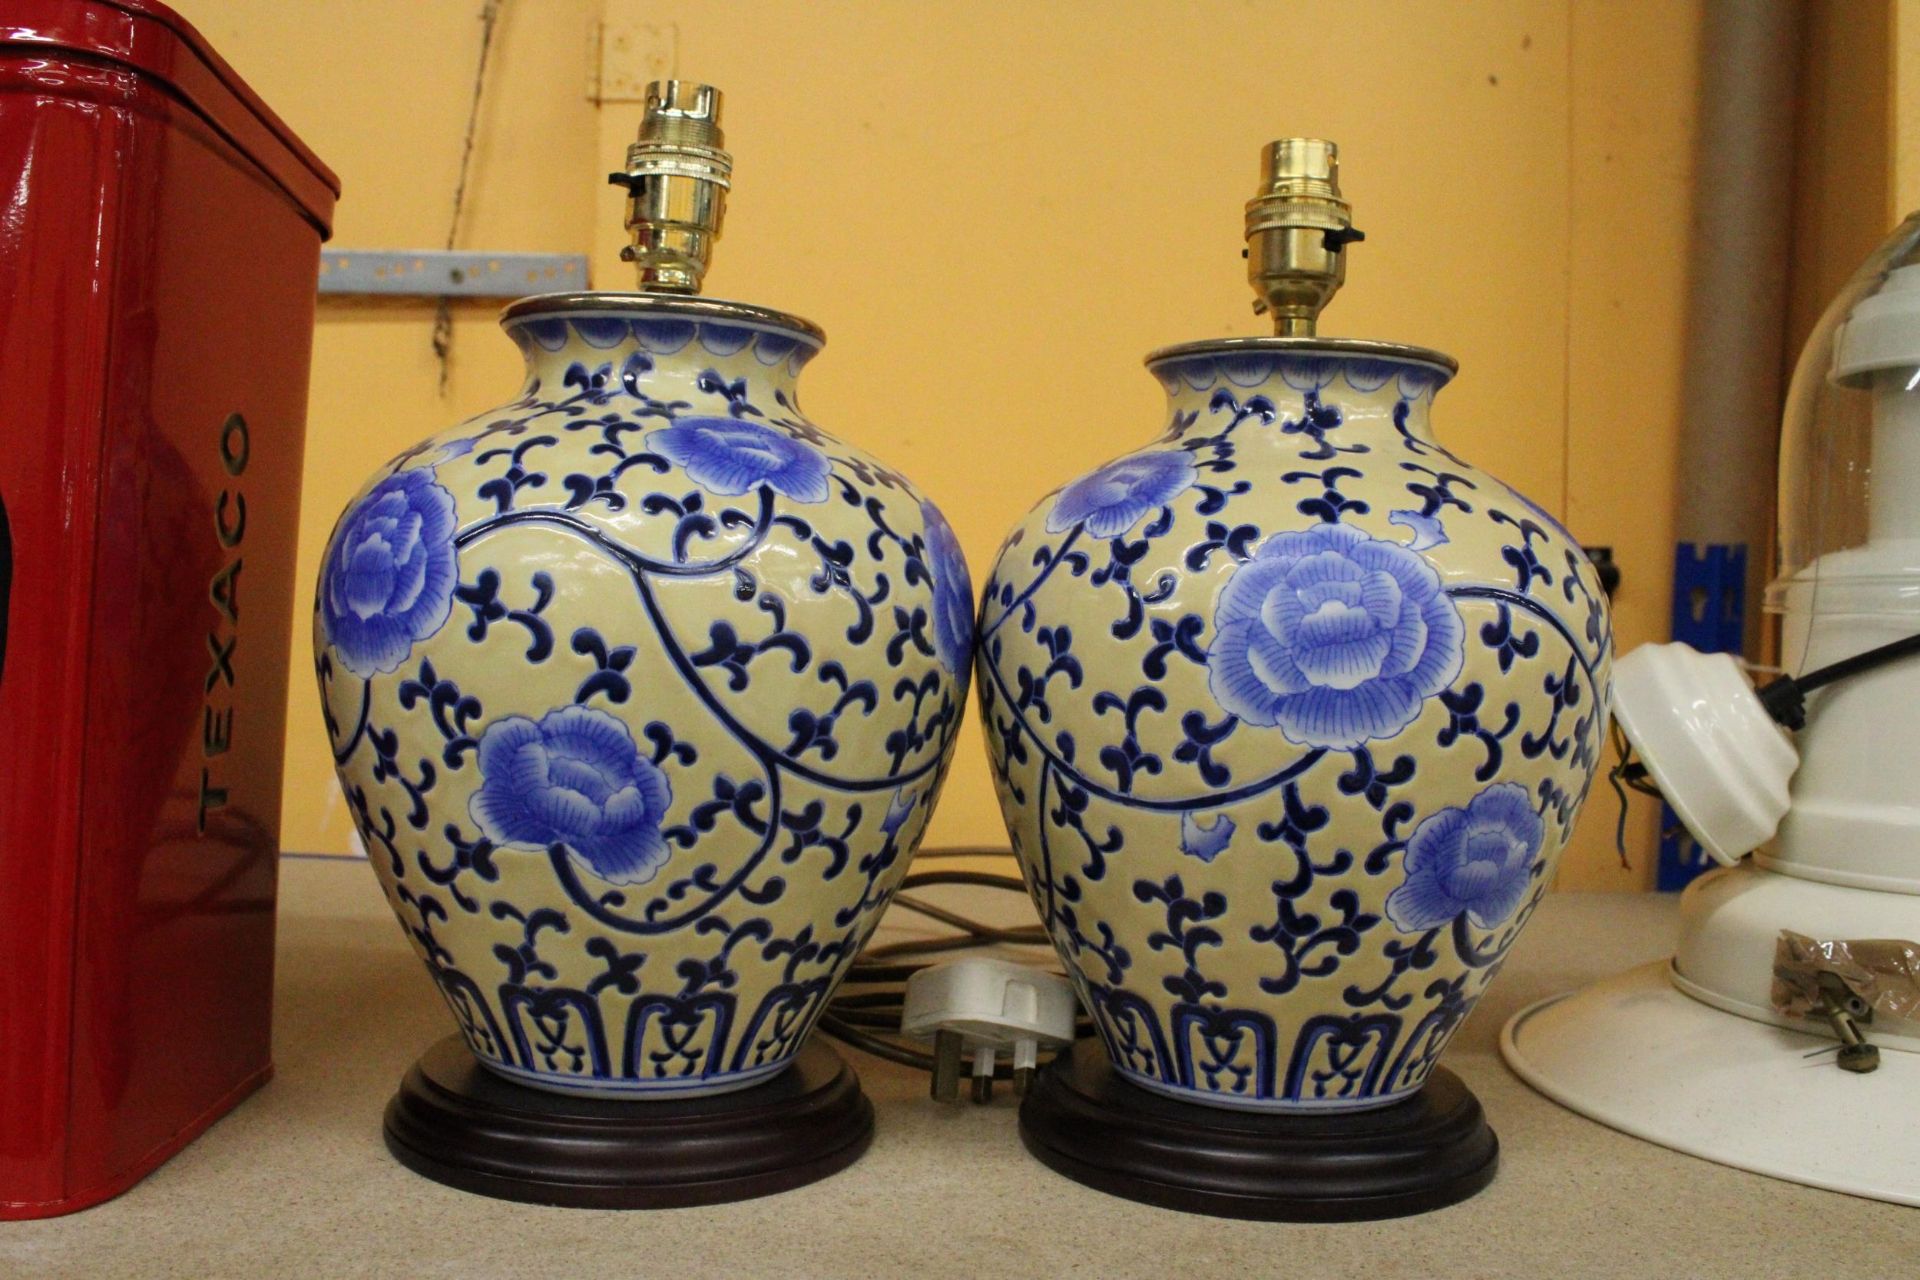 A PAIR OF ORIENTAL STYLE TABLE LAMPS